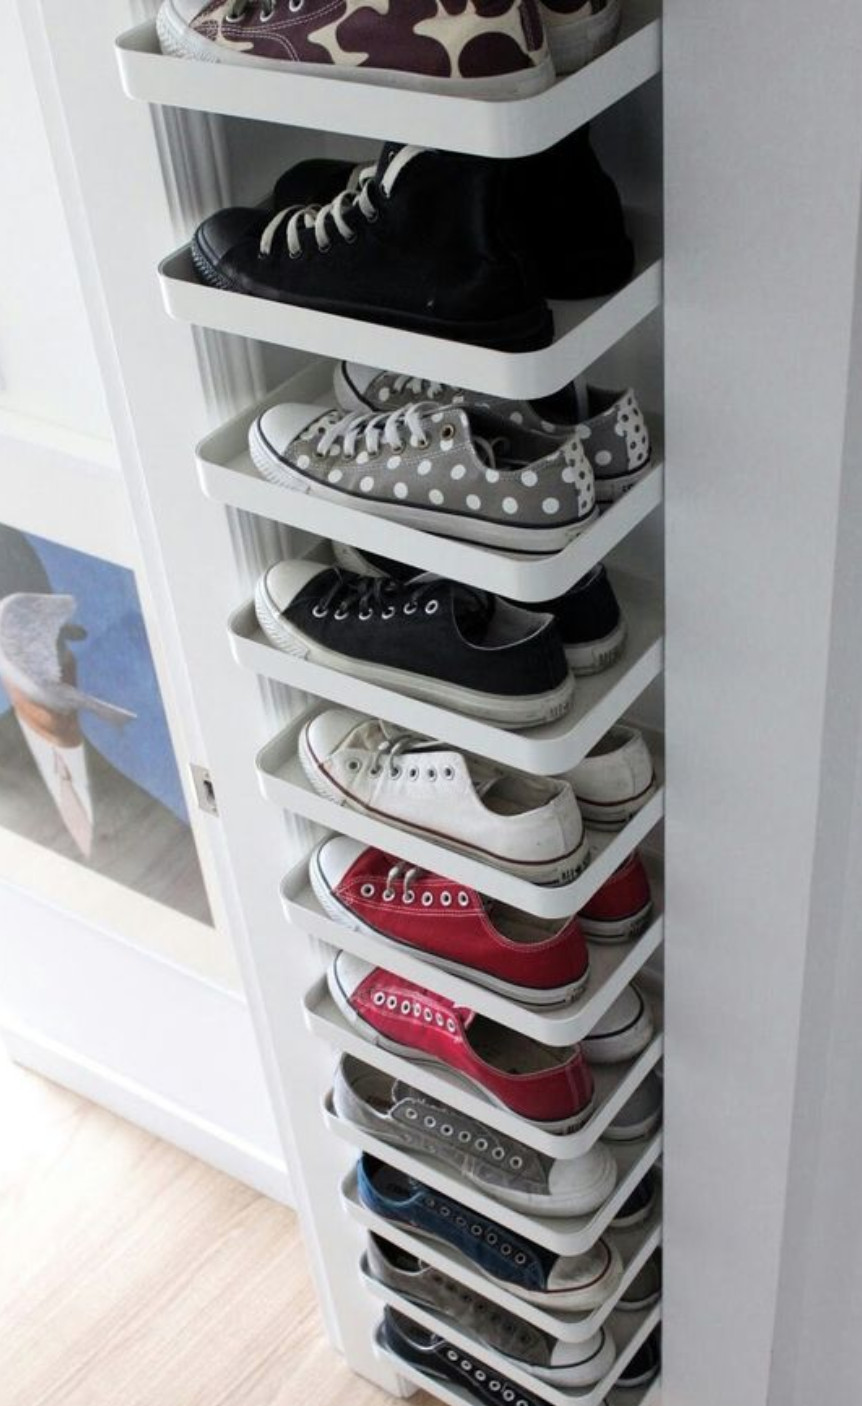 DIY Shoe Organizer For Small Closet
 The Best DIY Inspiration That Will Keep Your Room